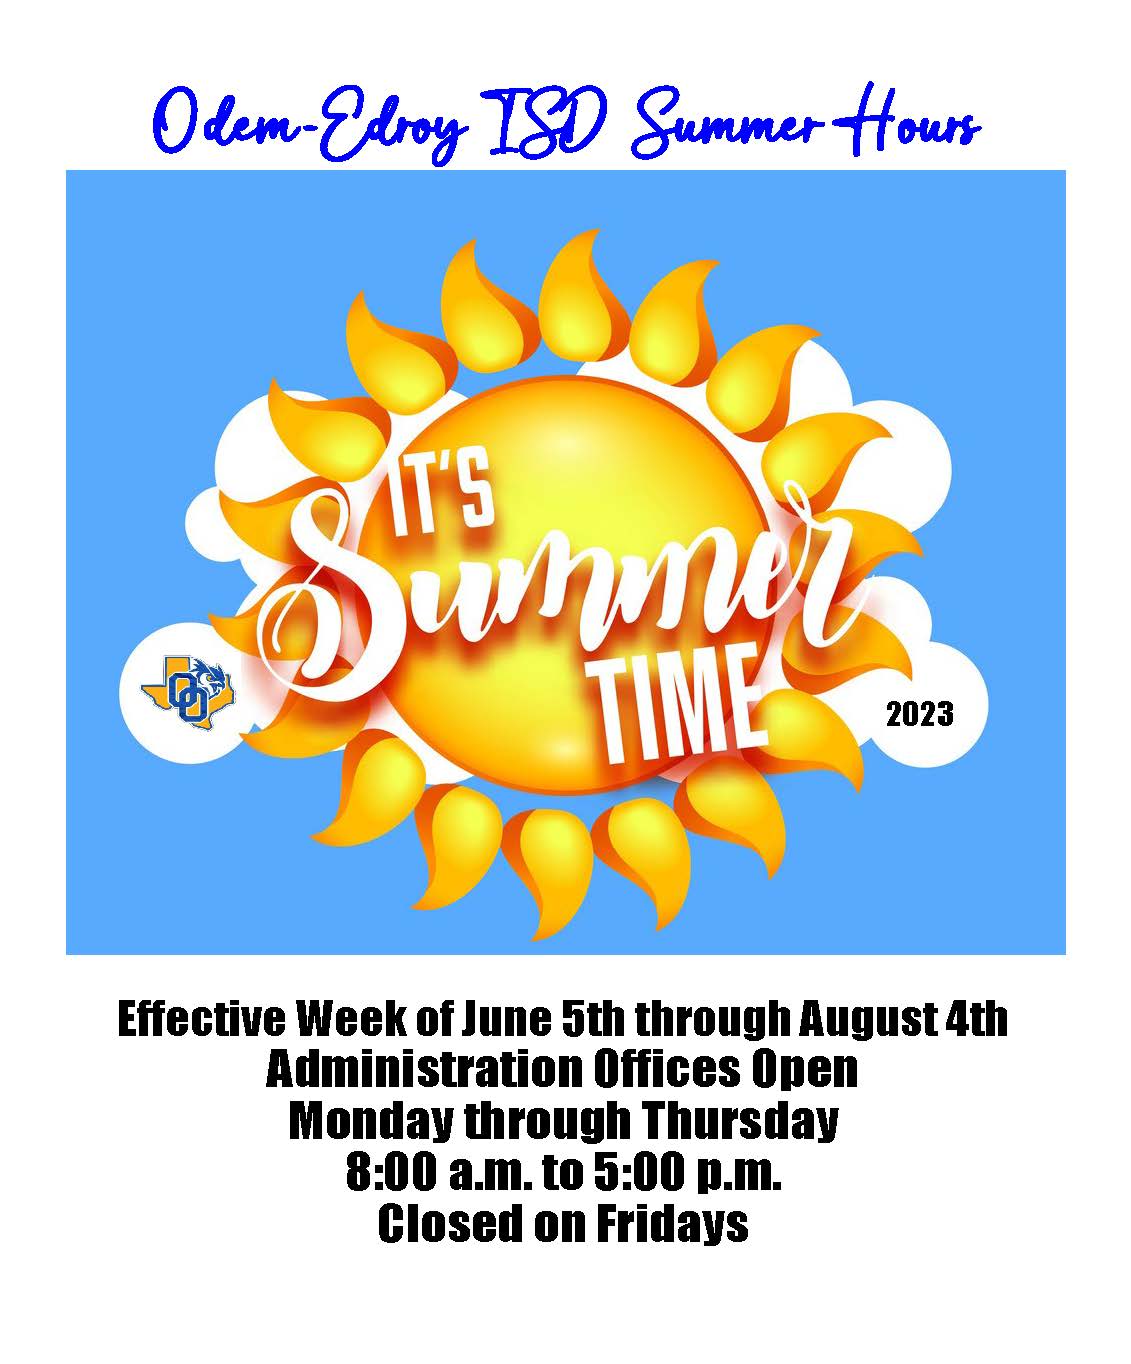 Summer hours for Administration 